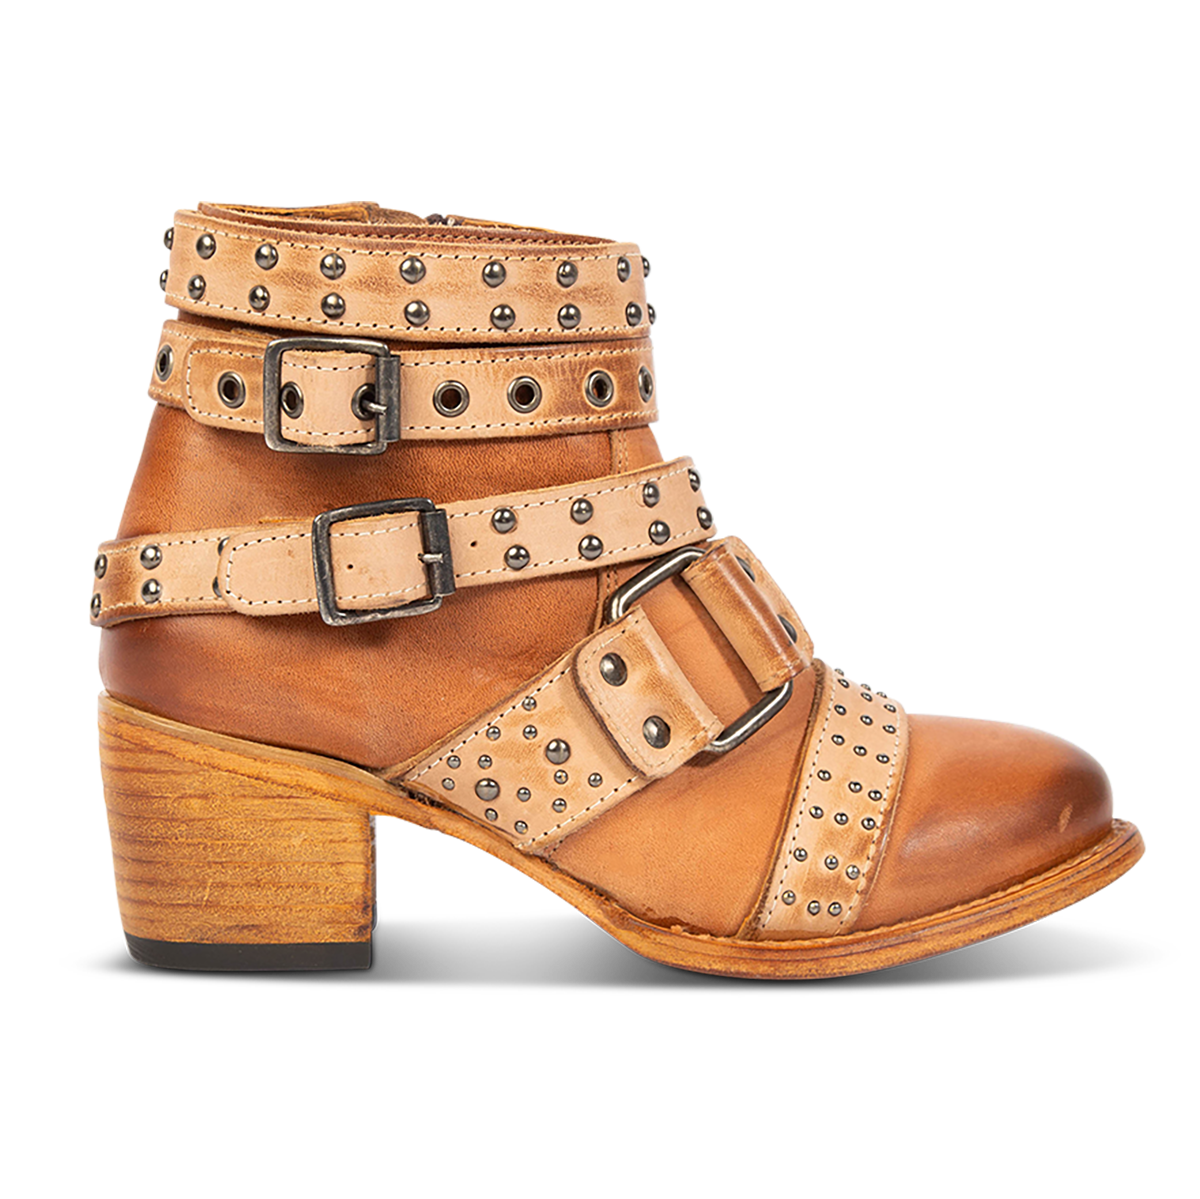 FREEBIRD women's Slayer tan multi leather ankle bootie with inside zip closure and embellished buckle straps